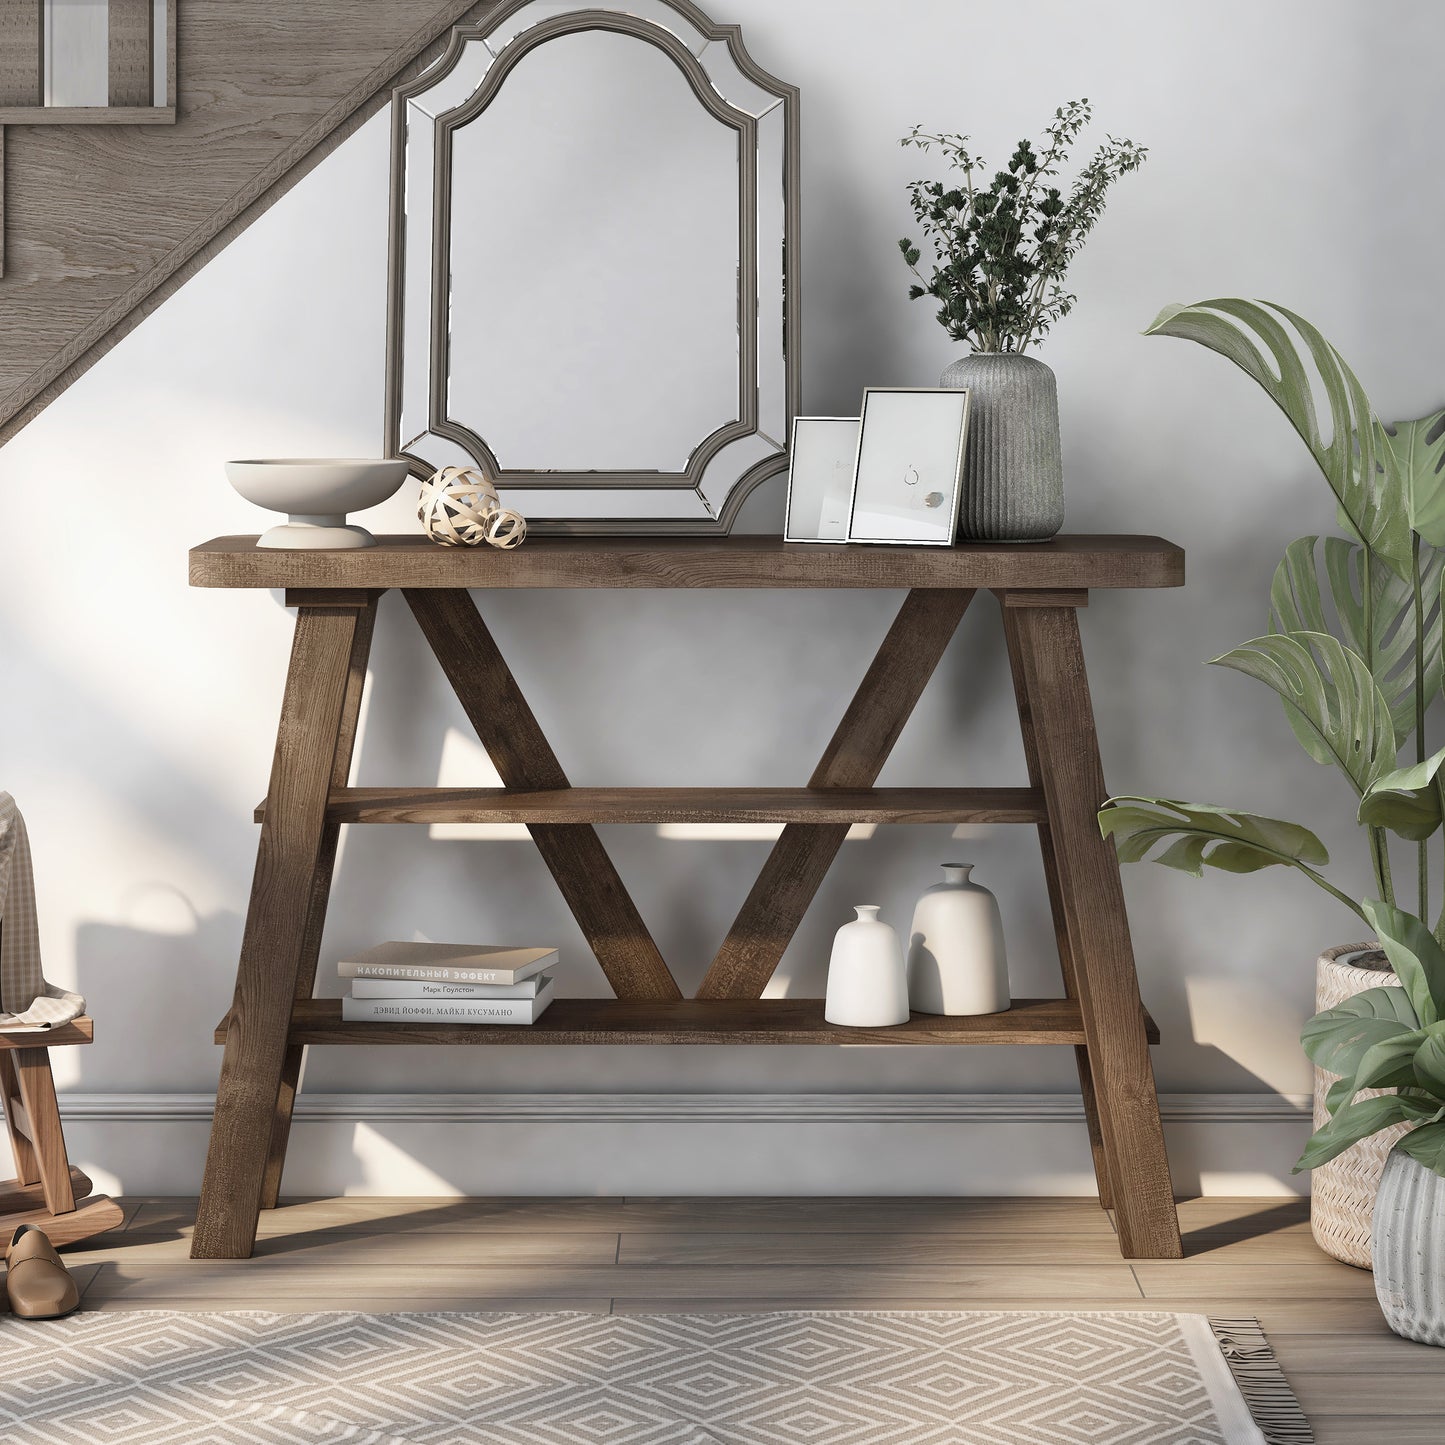 Front-facing farmhouse reclaimed oak two-shelf console table in a living area with accessories